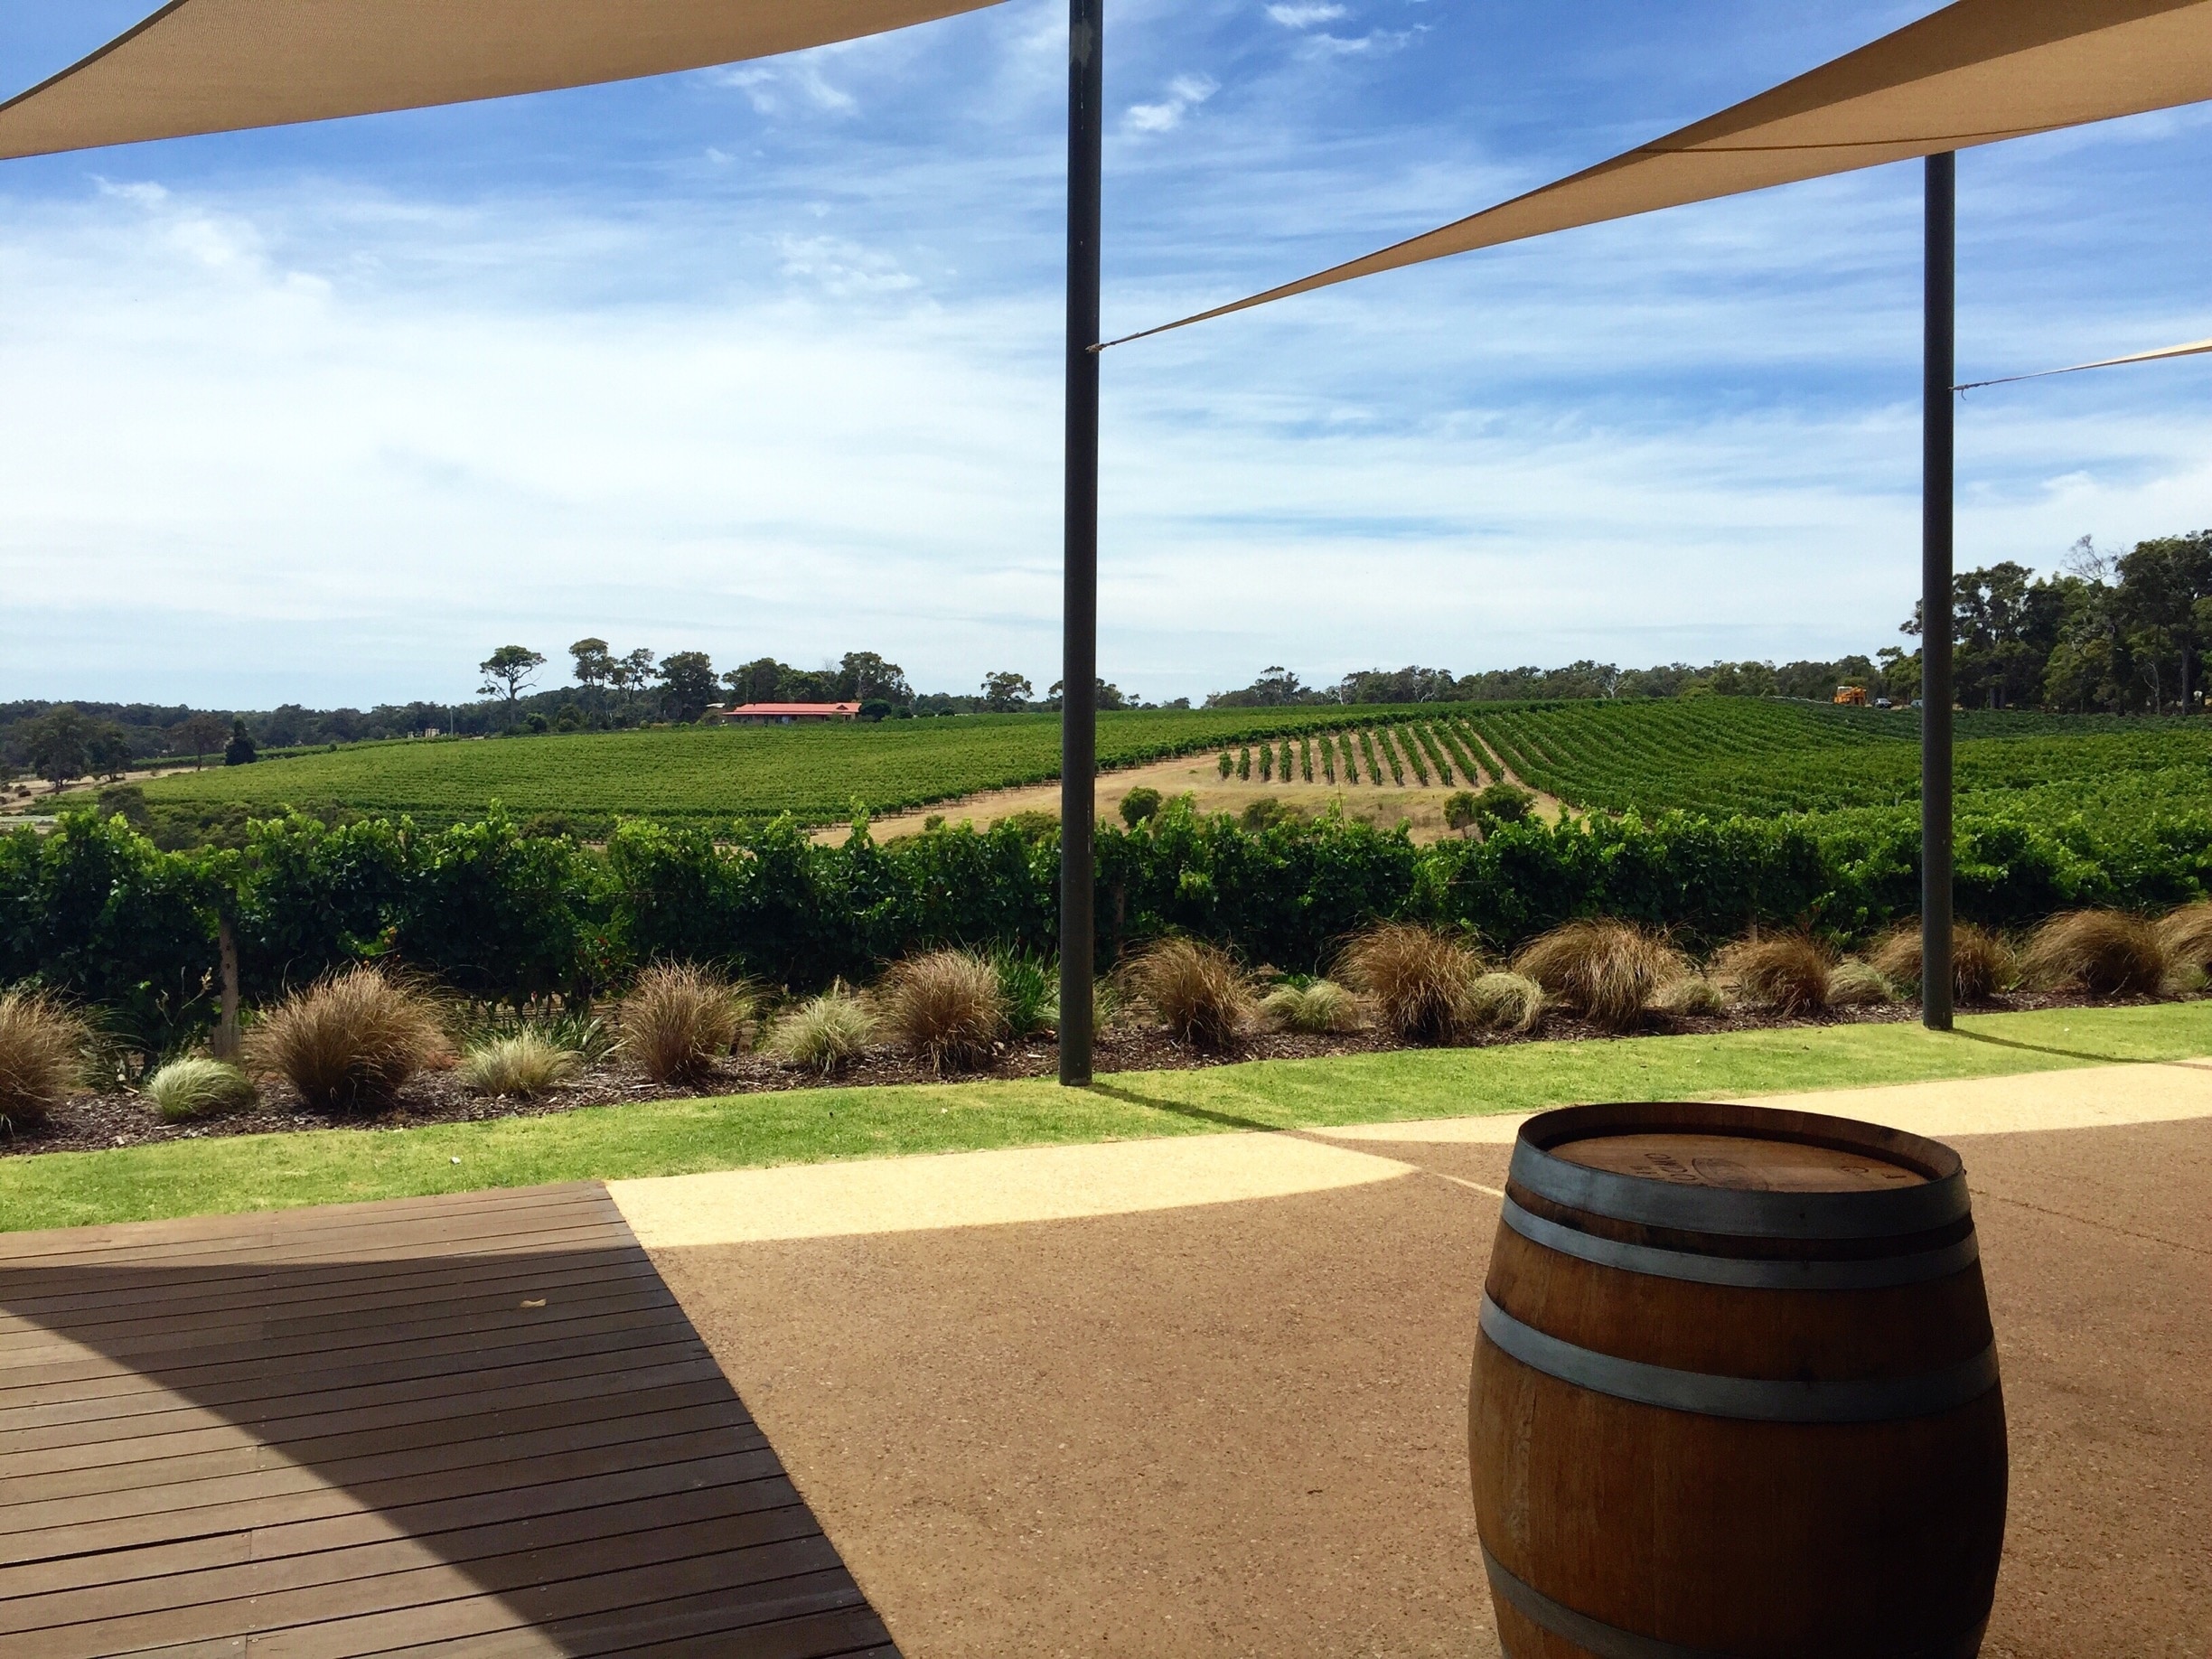 Will's Domain is one of my favourite lunch spots in #MargaretRiver #Australia. Fabulous food, great wine, stunning views and a playground for the kids. 